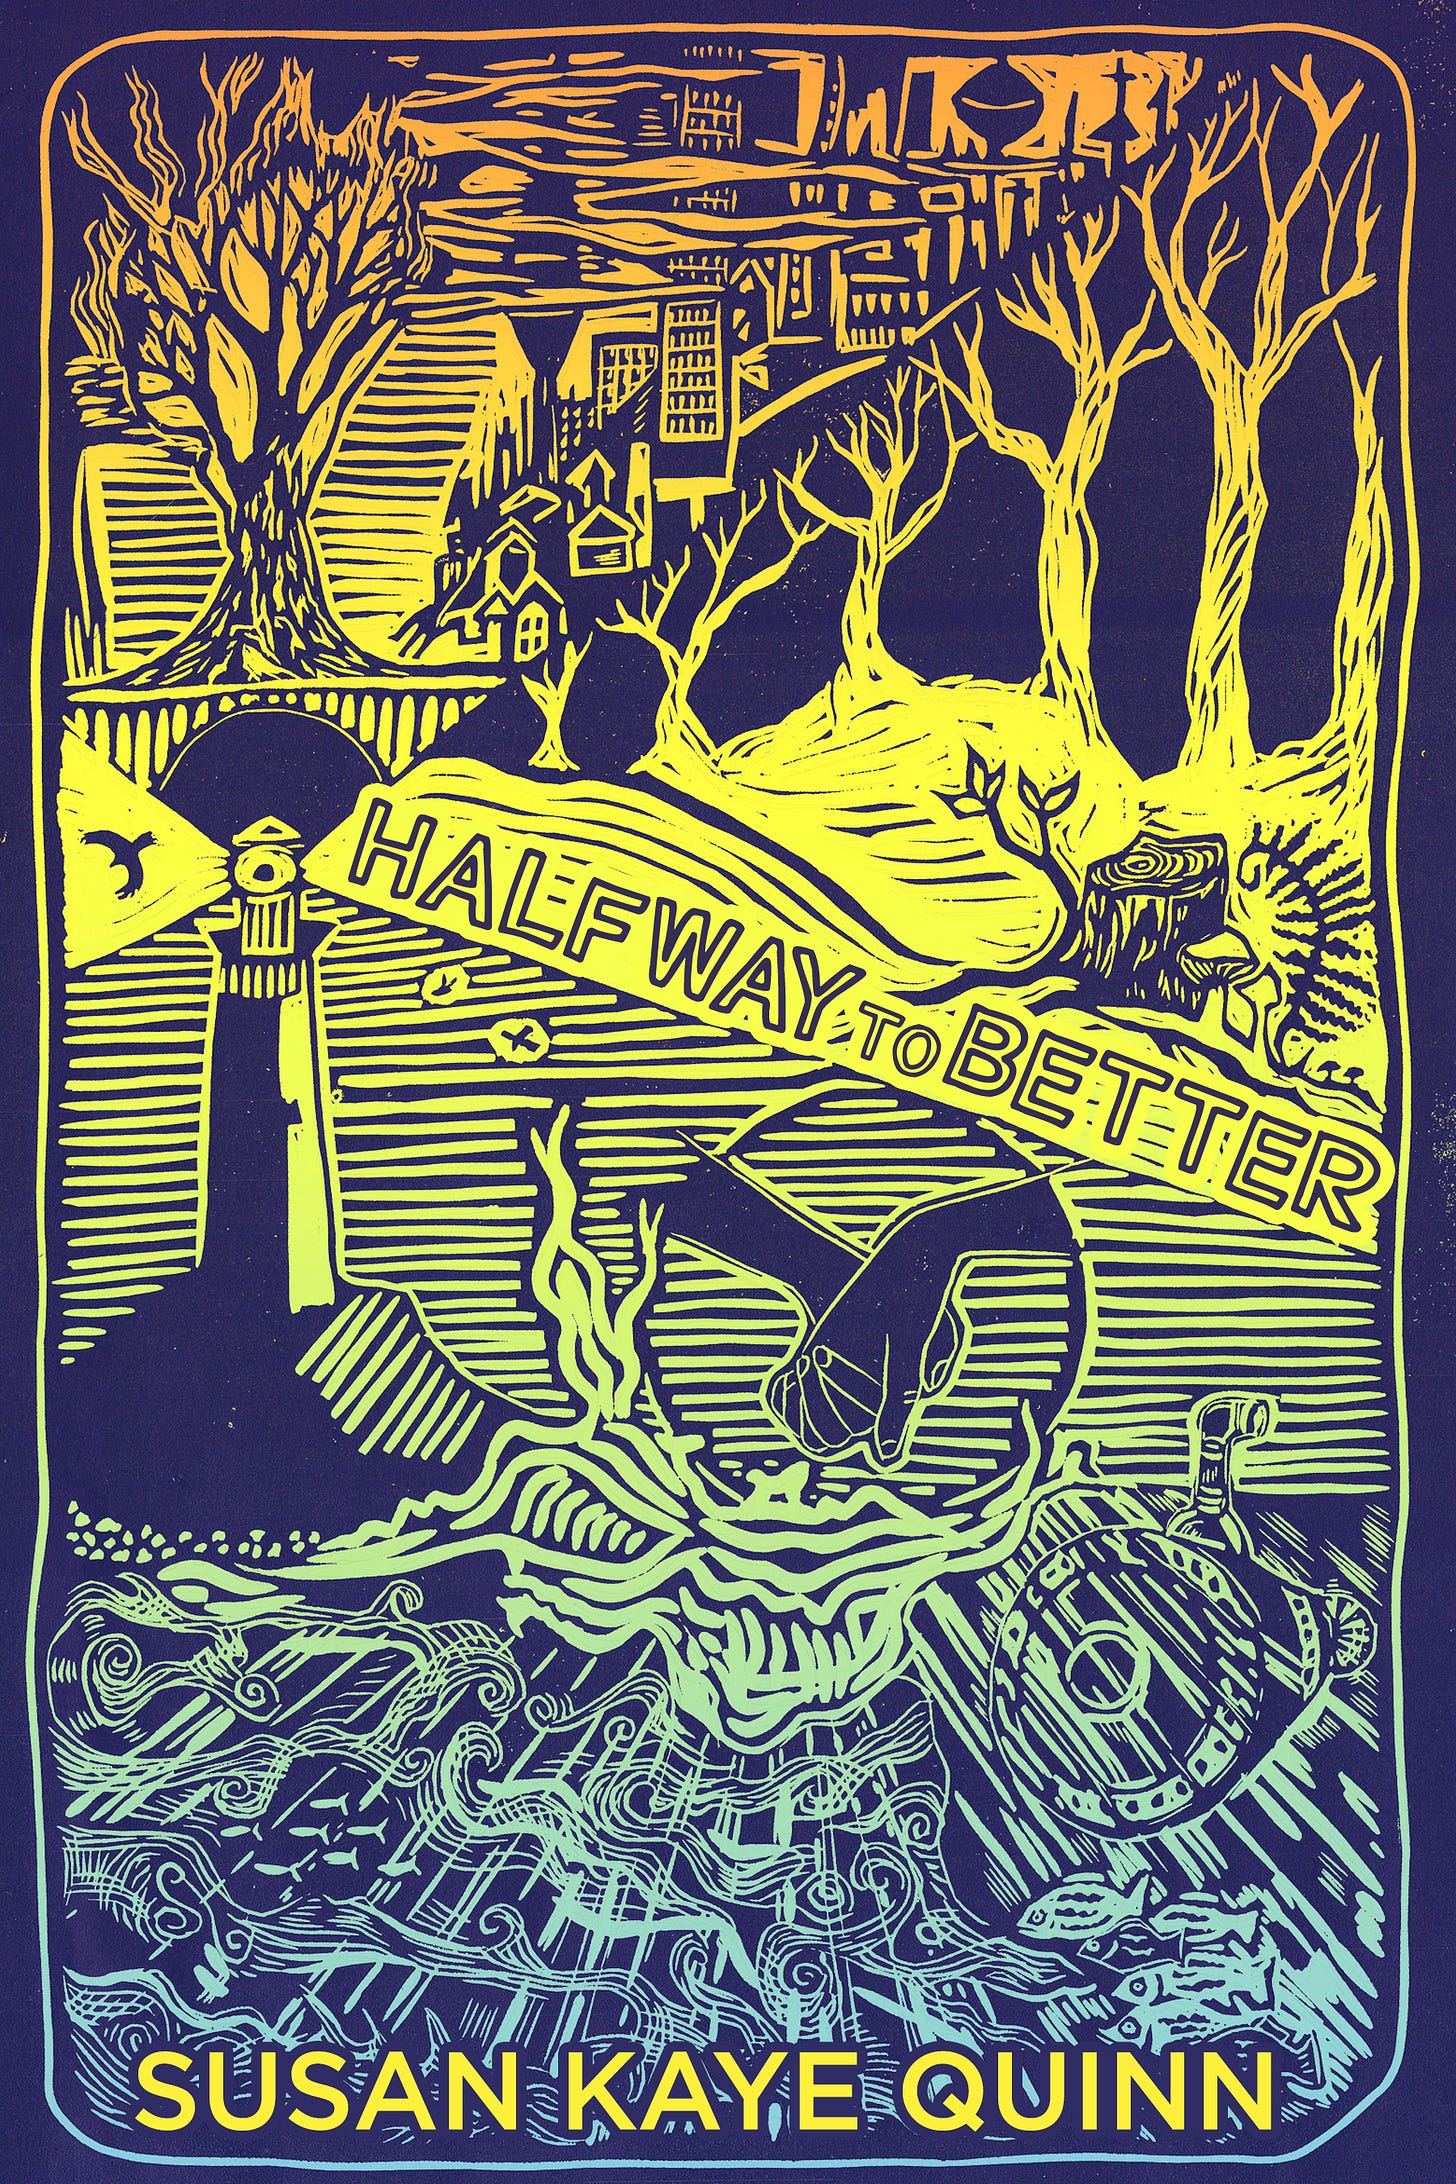 Halfway to Better cover made from linograph printing